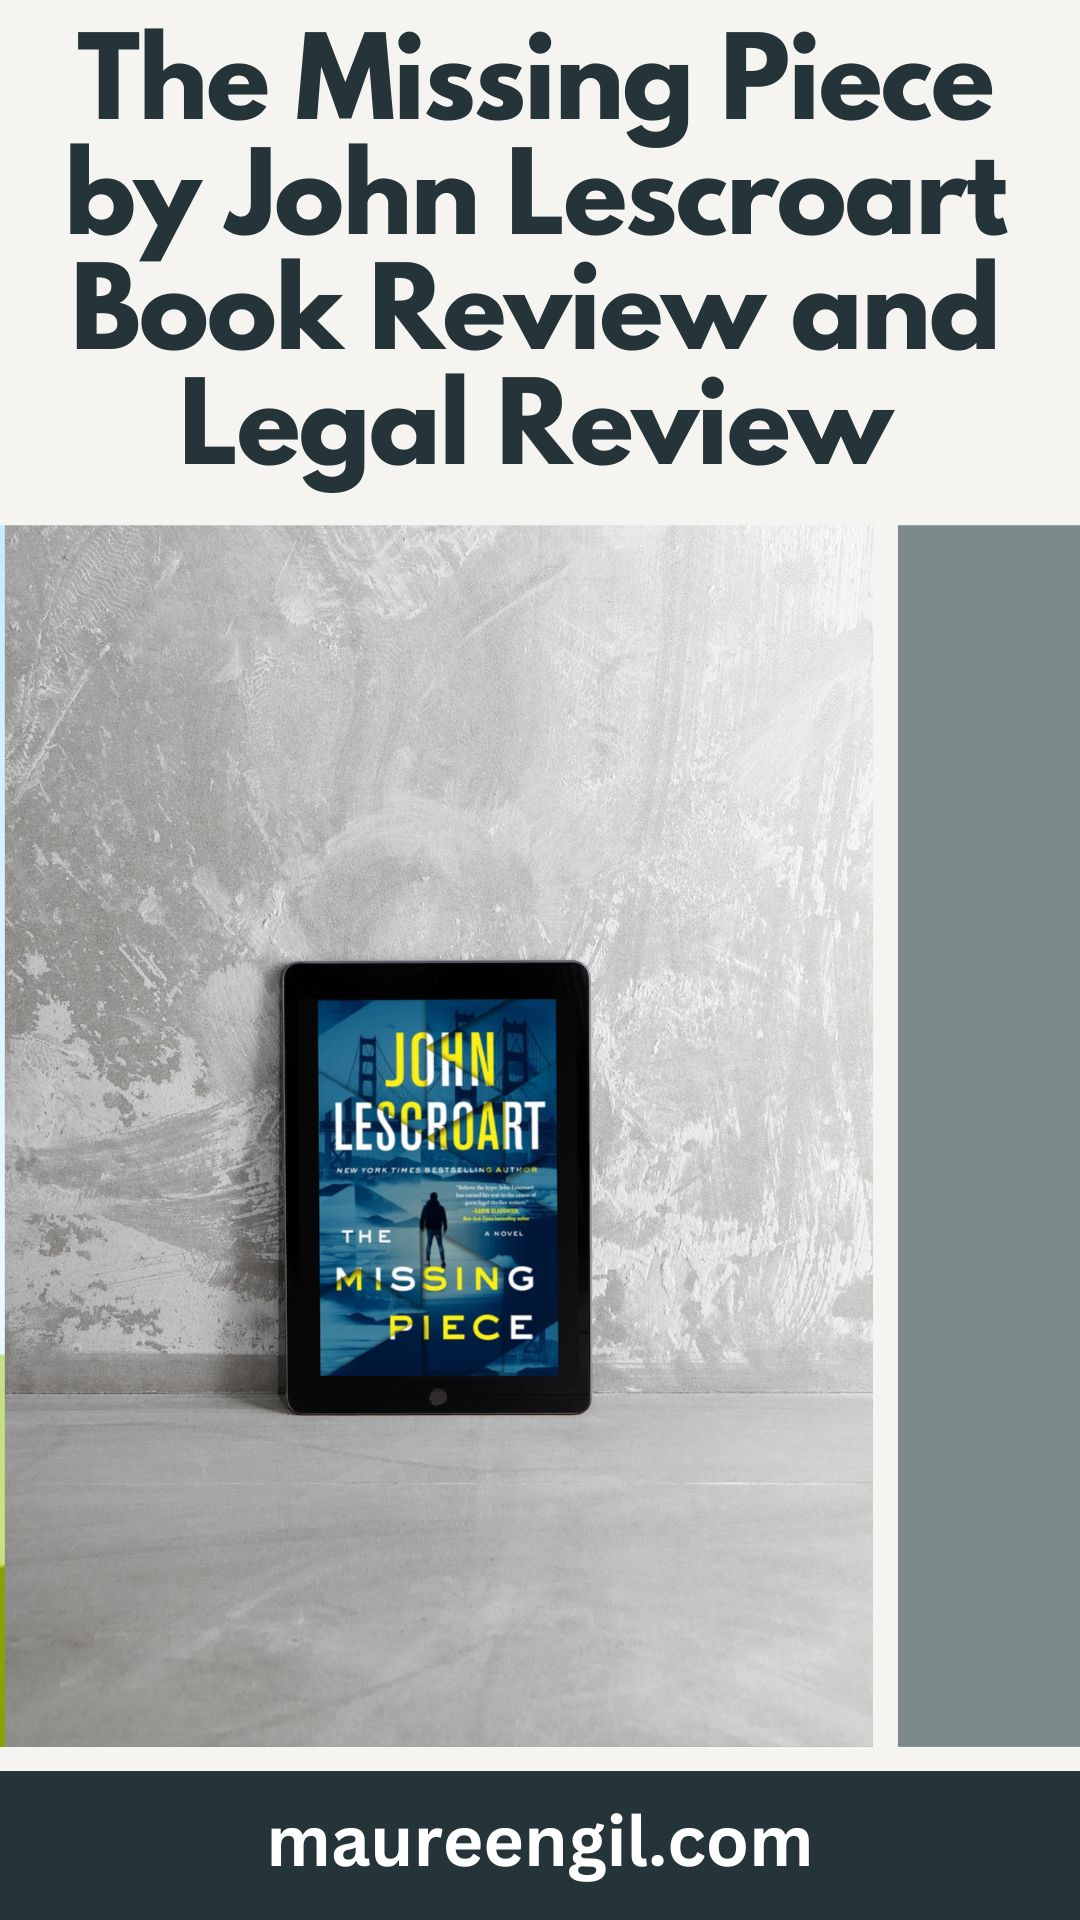 Looking for a legal fiction thriller to read? Check out our recap of The Missing Piece by John Lescroart. I wrote a comprehensive book summary and legal review of this novel, with an honest review. #BookReview #TheMissingPiece #JohnLescroart #MurderMystery #LegalFiction #CrimeFiction #BookRecommendations #MysteryBooks #Bookish #DiverseVoices #ReadingCommunity #BookLovers #Books #ReadingTime #PinterestBooks #NewBooks #BookAddiction #BookNerds #BookWorms #Bookaholics #BookReviewing #BookClub